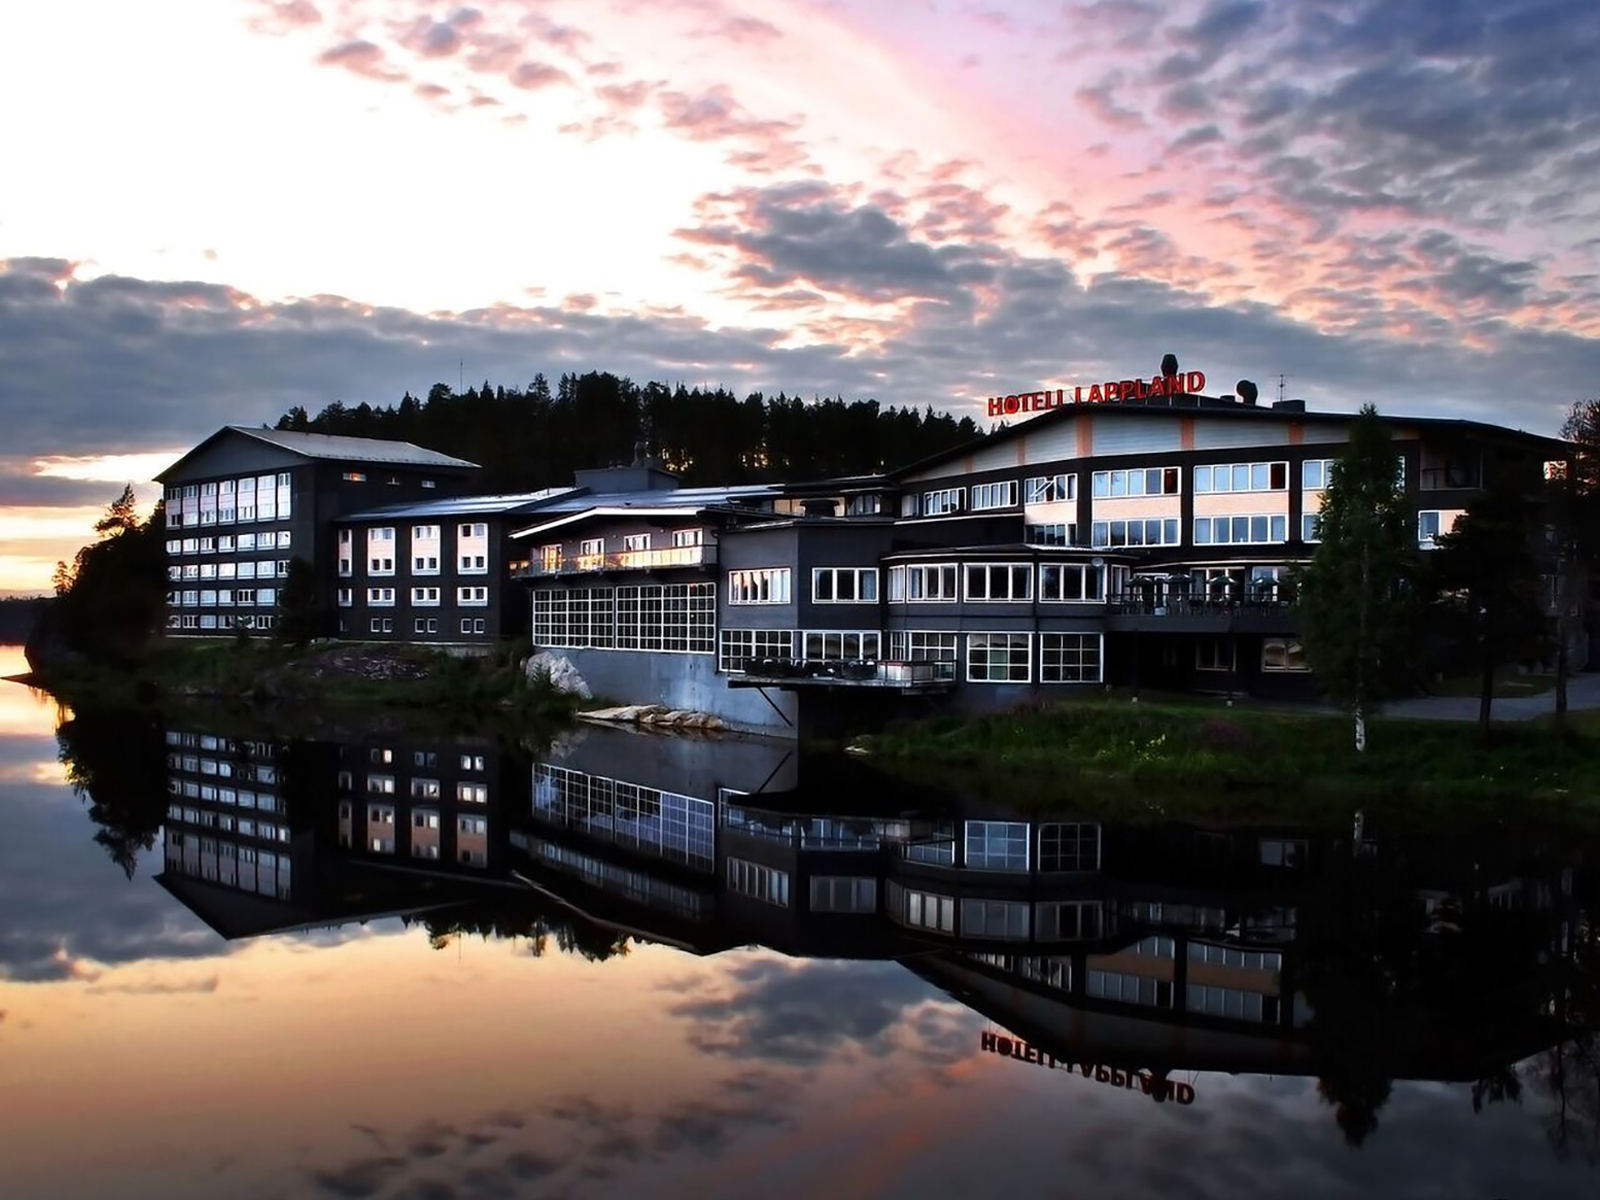 Hotell Lappland <br/>147.78 ew <br/> <a href='http://vakantieoplossing.nl/outpage/?id=6ad4aa18bd9d8bb458562fecc39bb8a3' target='_blank'>View Details</a>